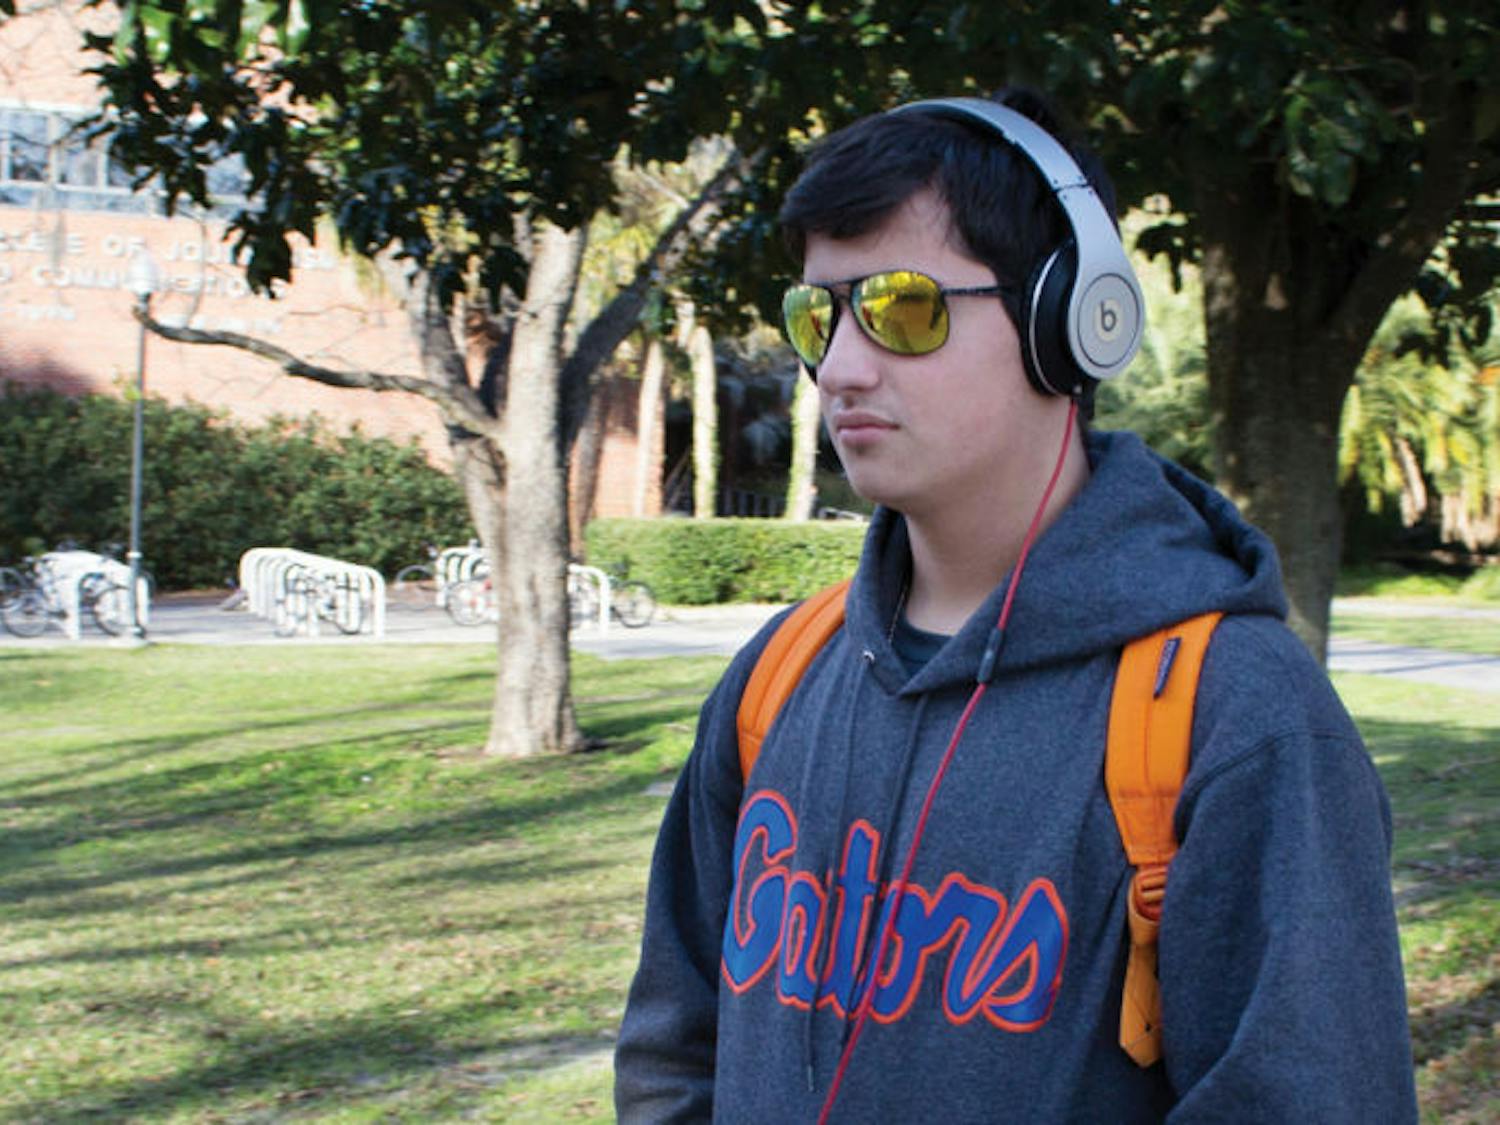 Eighteen-year-old UF engineering freshman Robert Morgado listens to music on his way to the Reitz Union on Tuesday afternoon. The Alachua County Library District has upped the size of its music collection by joining Freegal Music Service. Library users can download three free MP3 tracks per week.